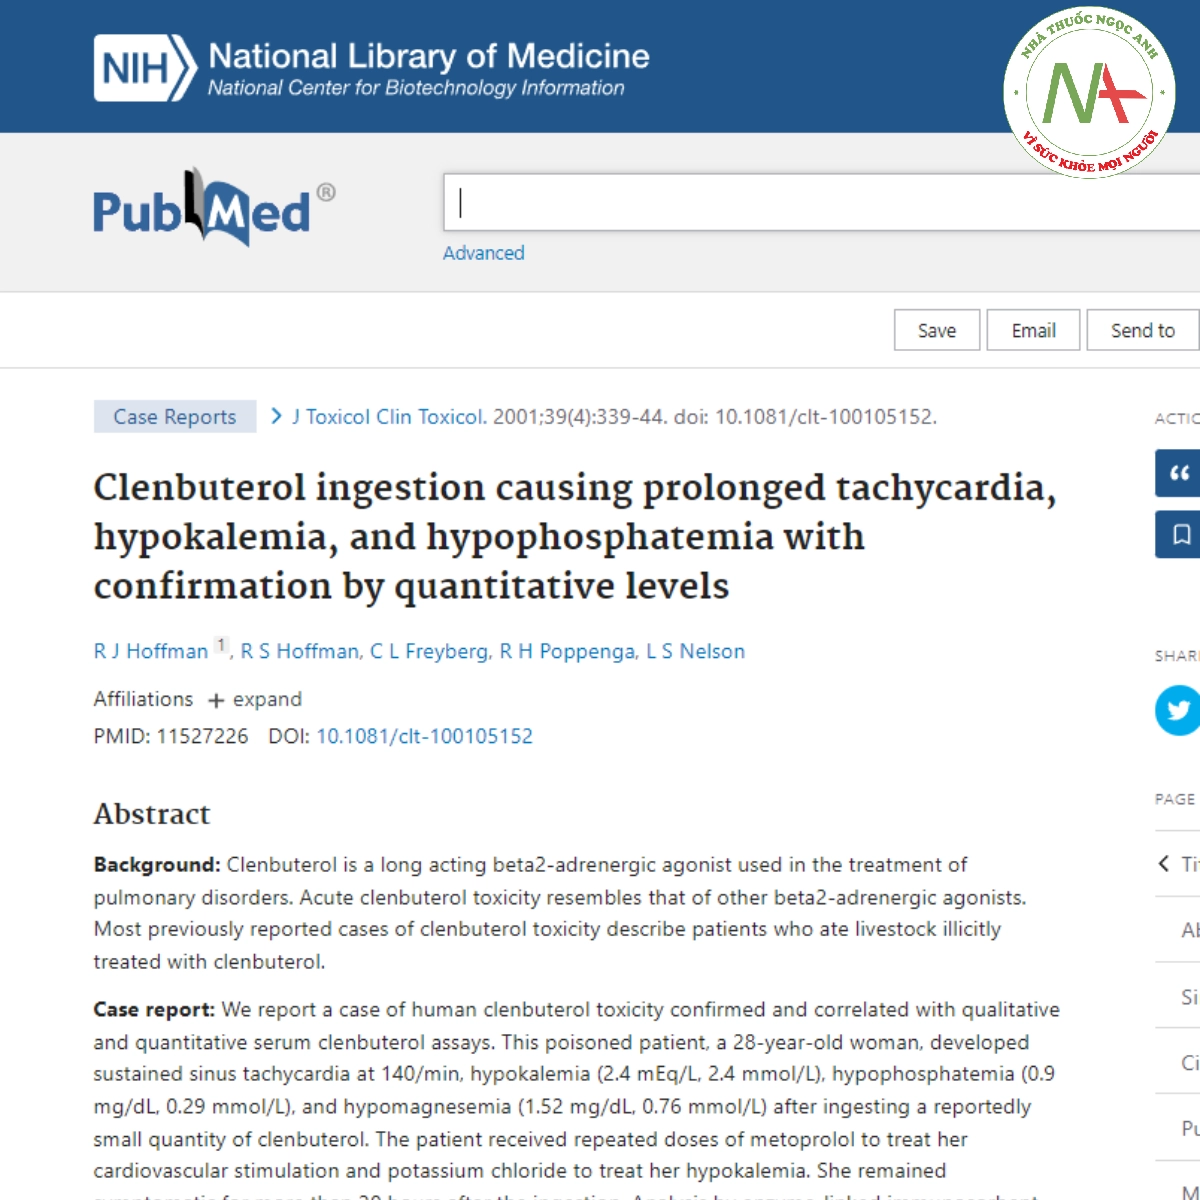 Clenbuterol ingestion causing prolonged tachycardia, hypokalemia, and hypophosphatemia with confirmation by quantitative levels